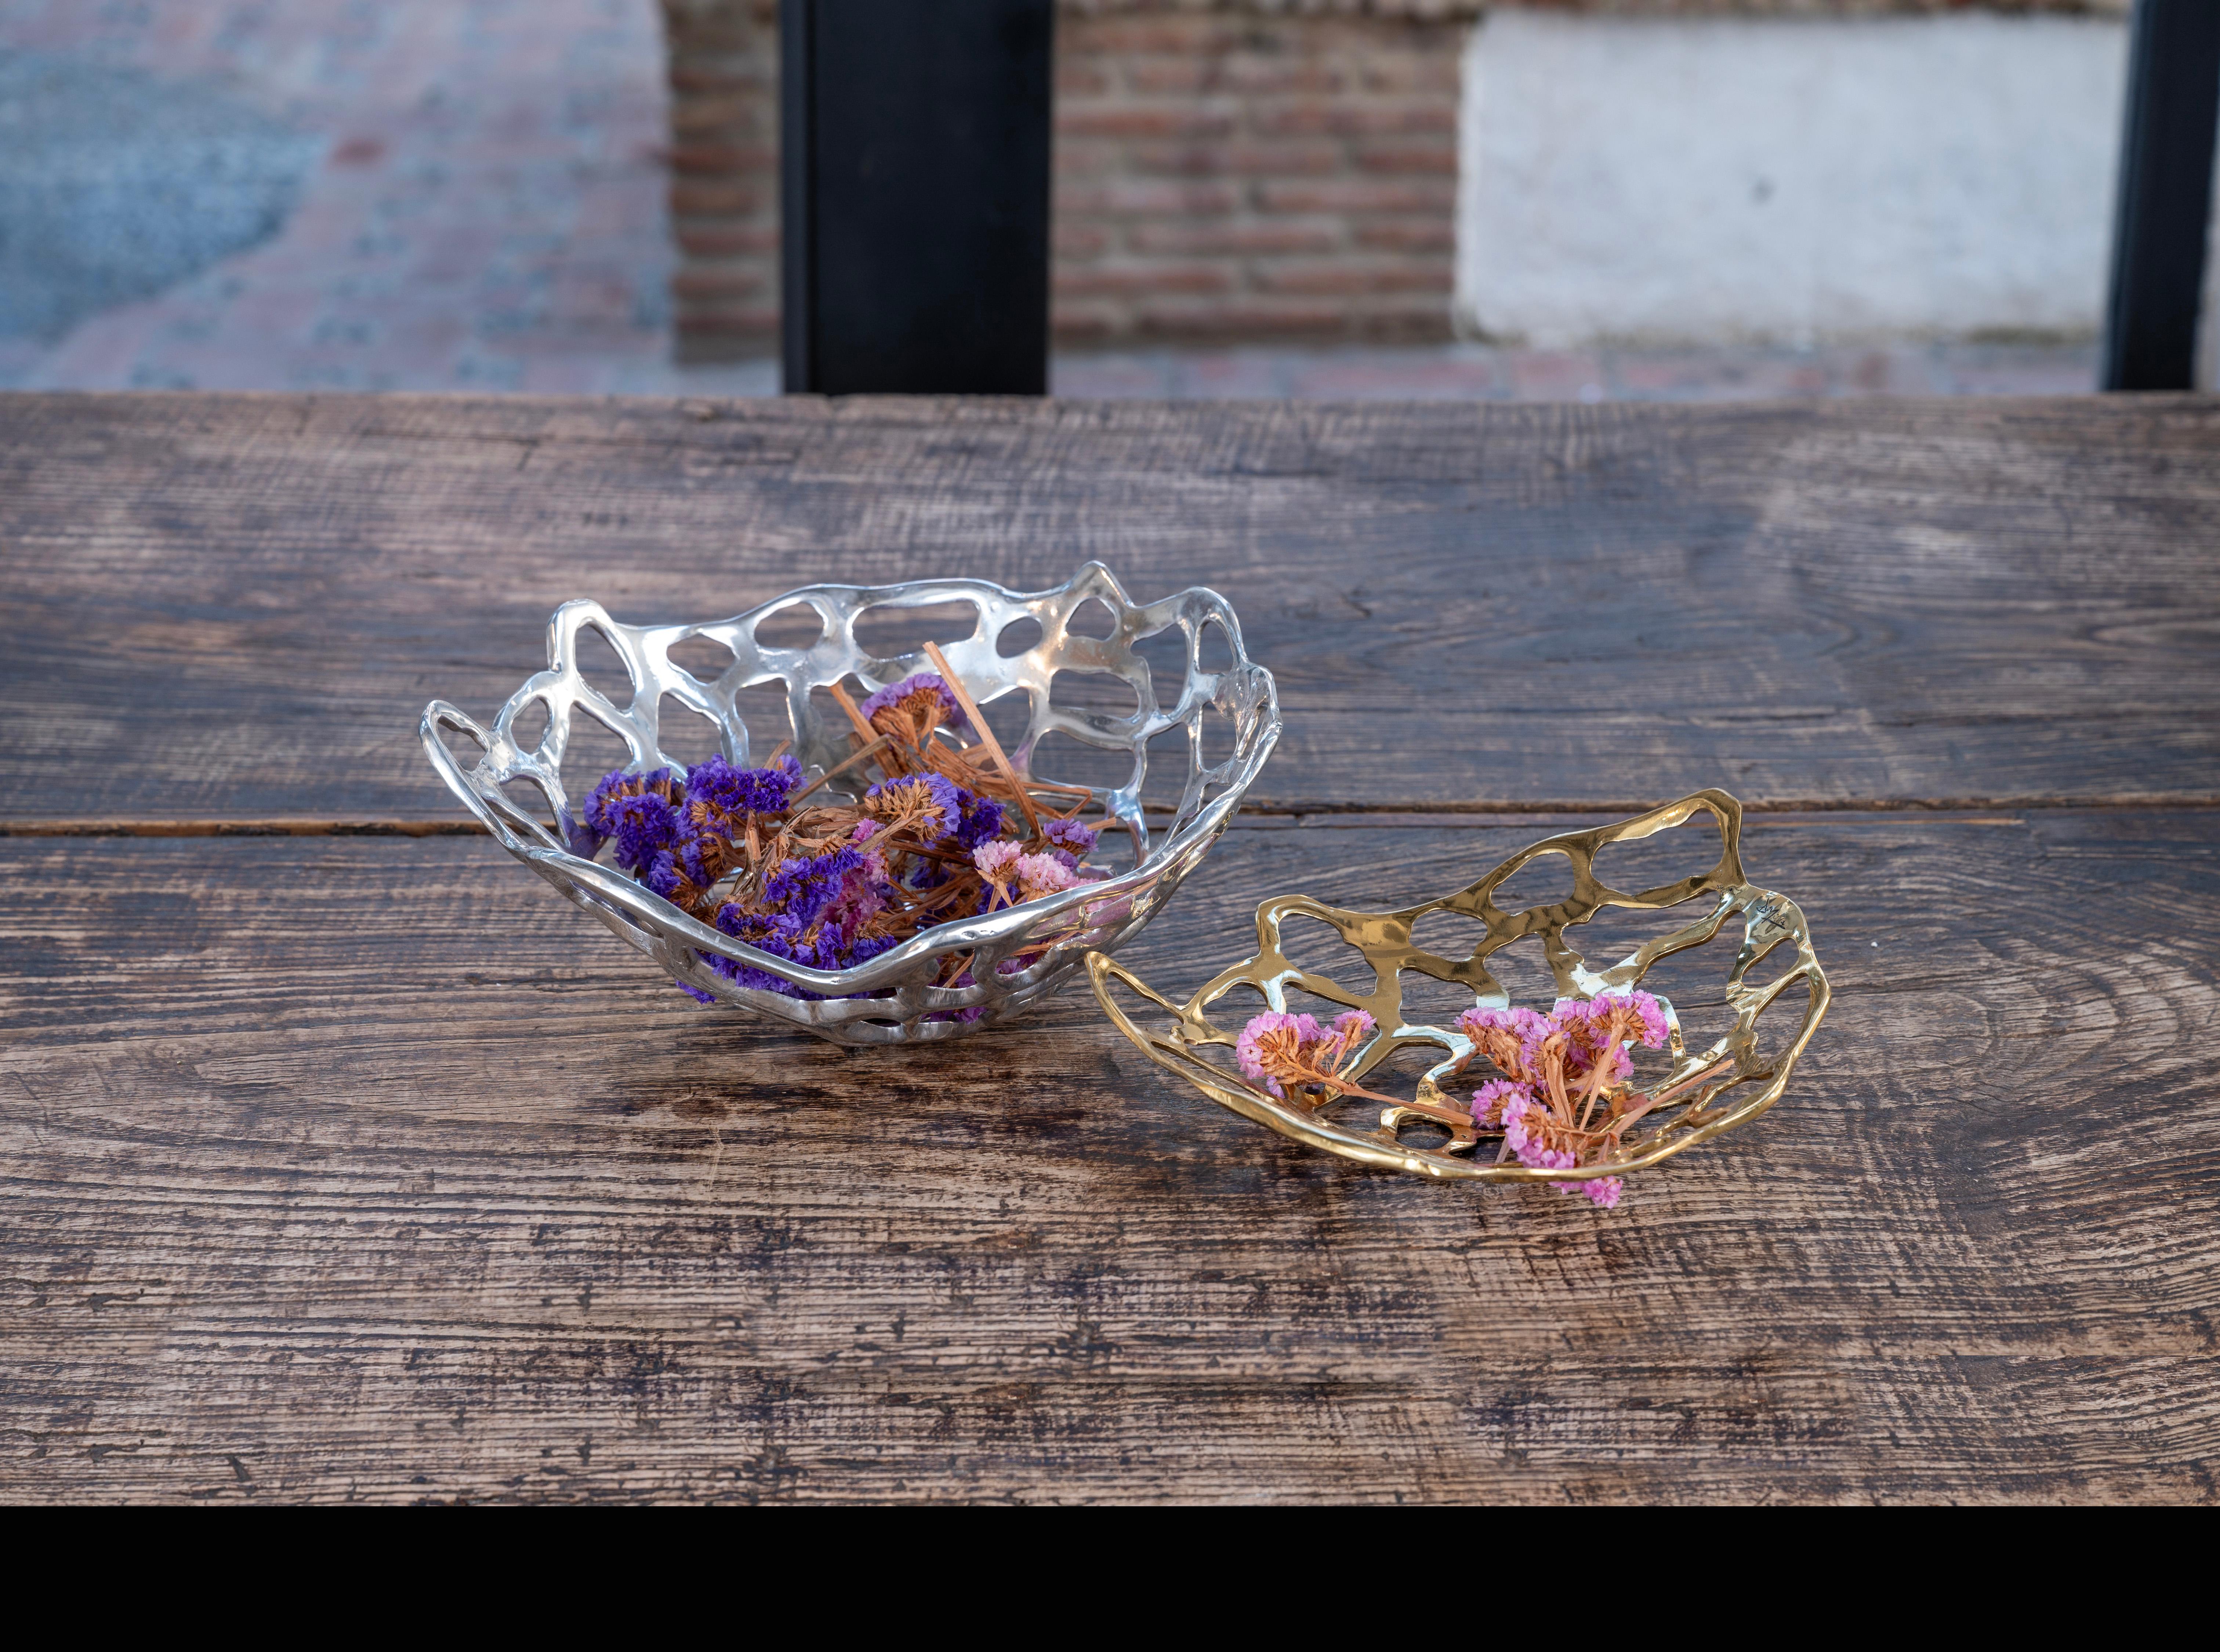 The decorative Medium Mesh Fruit  Bowl was created by David Marshall, it is made of sand cast aluminum .
Handmade, mounted and finished in our foundry and workshop in Spain from recycled materials.
Certified authentic by the Artist David Marshall